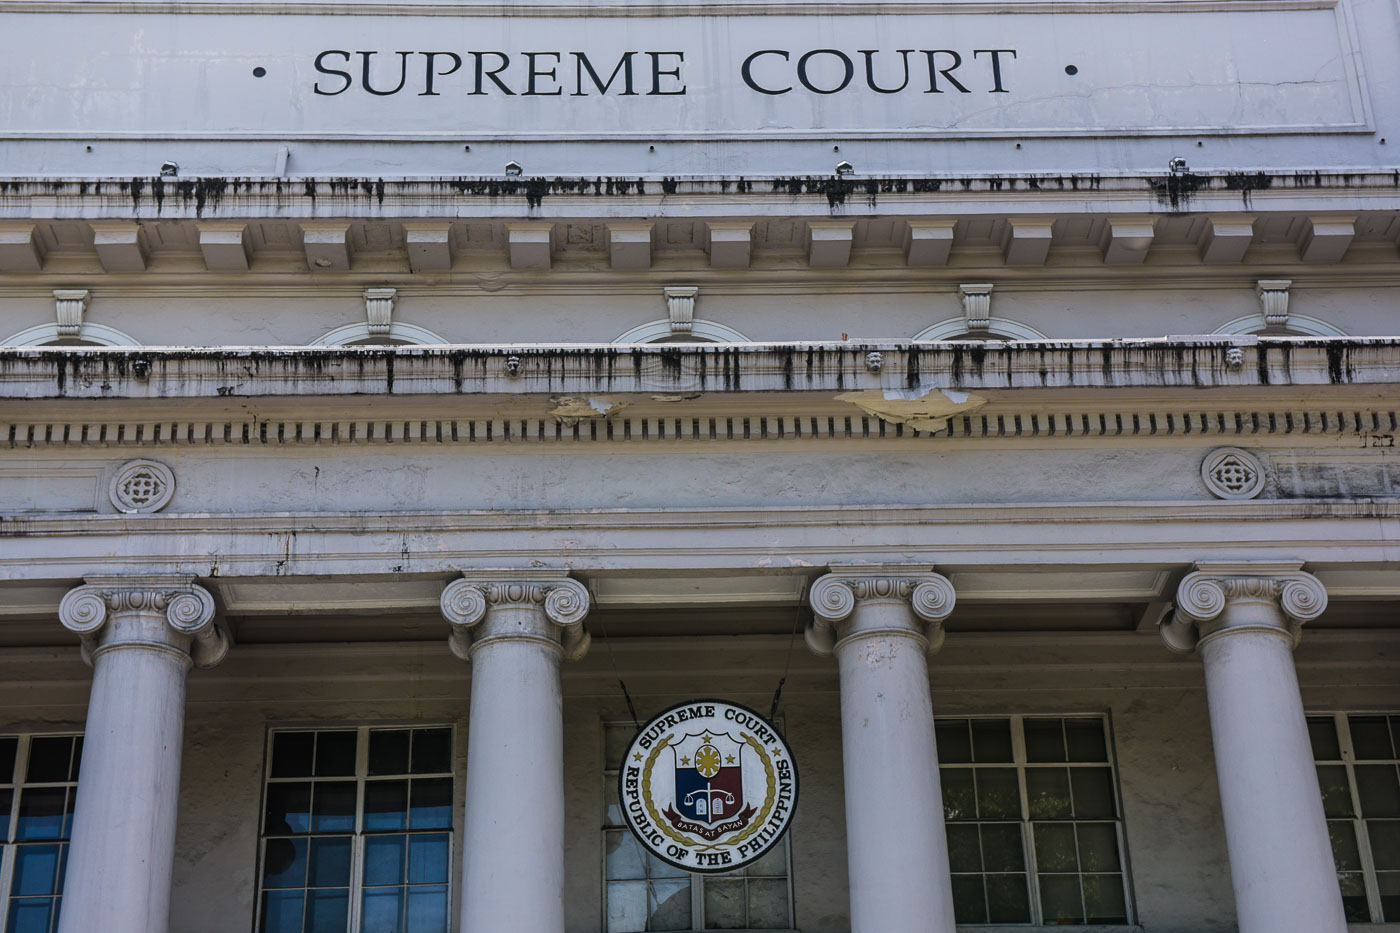 MAJORITY RULES. In a majority vote, the Supreme Court upholds the constitutionality of  the 3rd extension of martial law over Mindanao on February 19, 2019. Photo by LeAnne Jazul/Rappler 